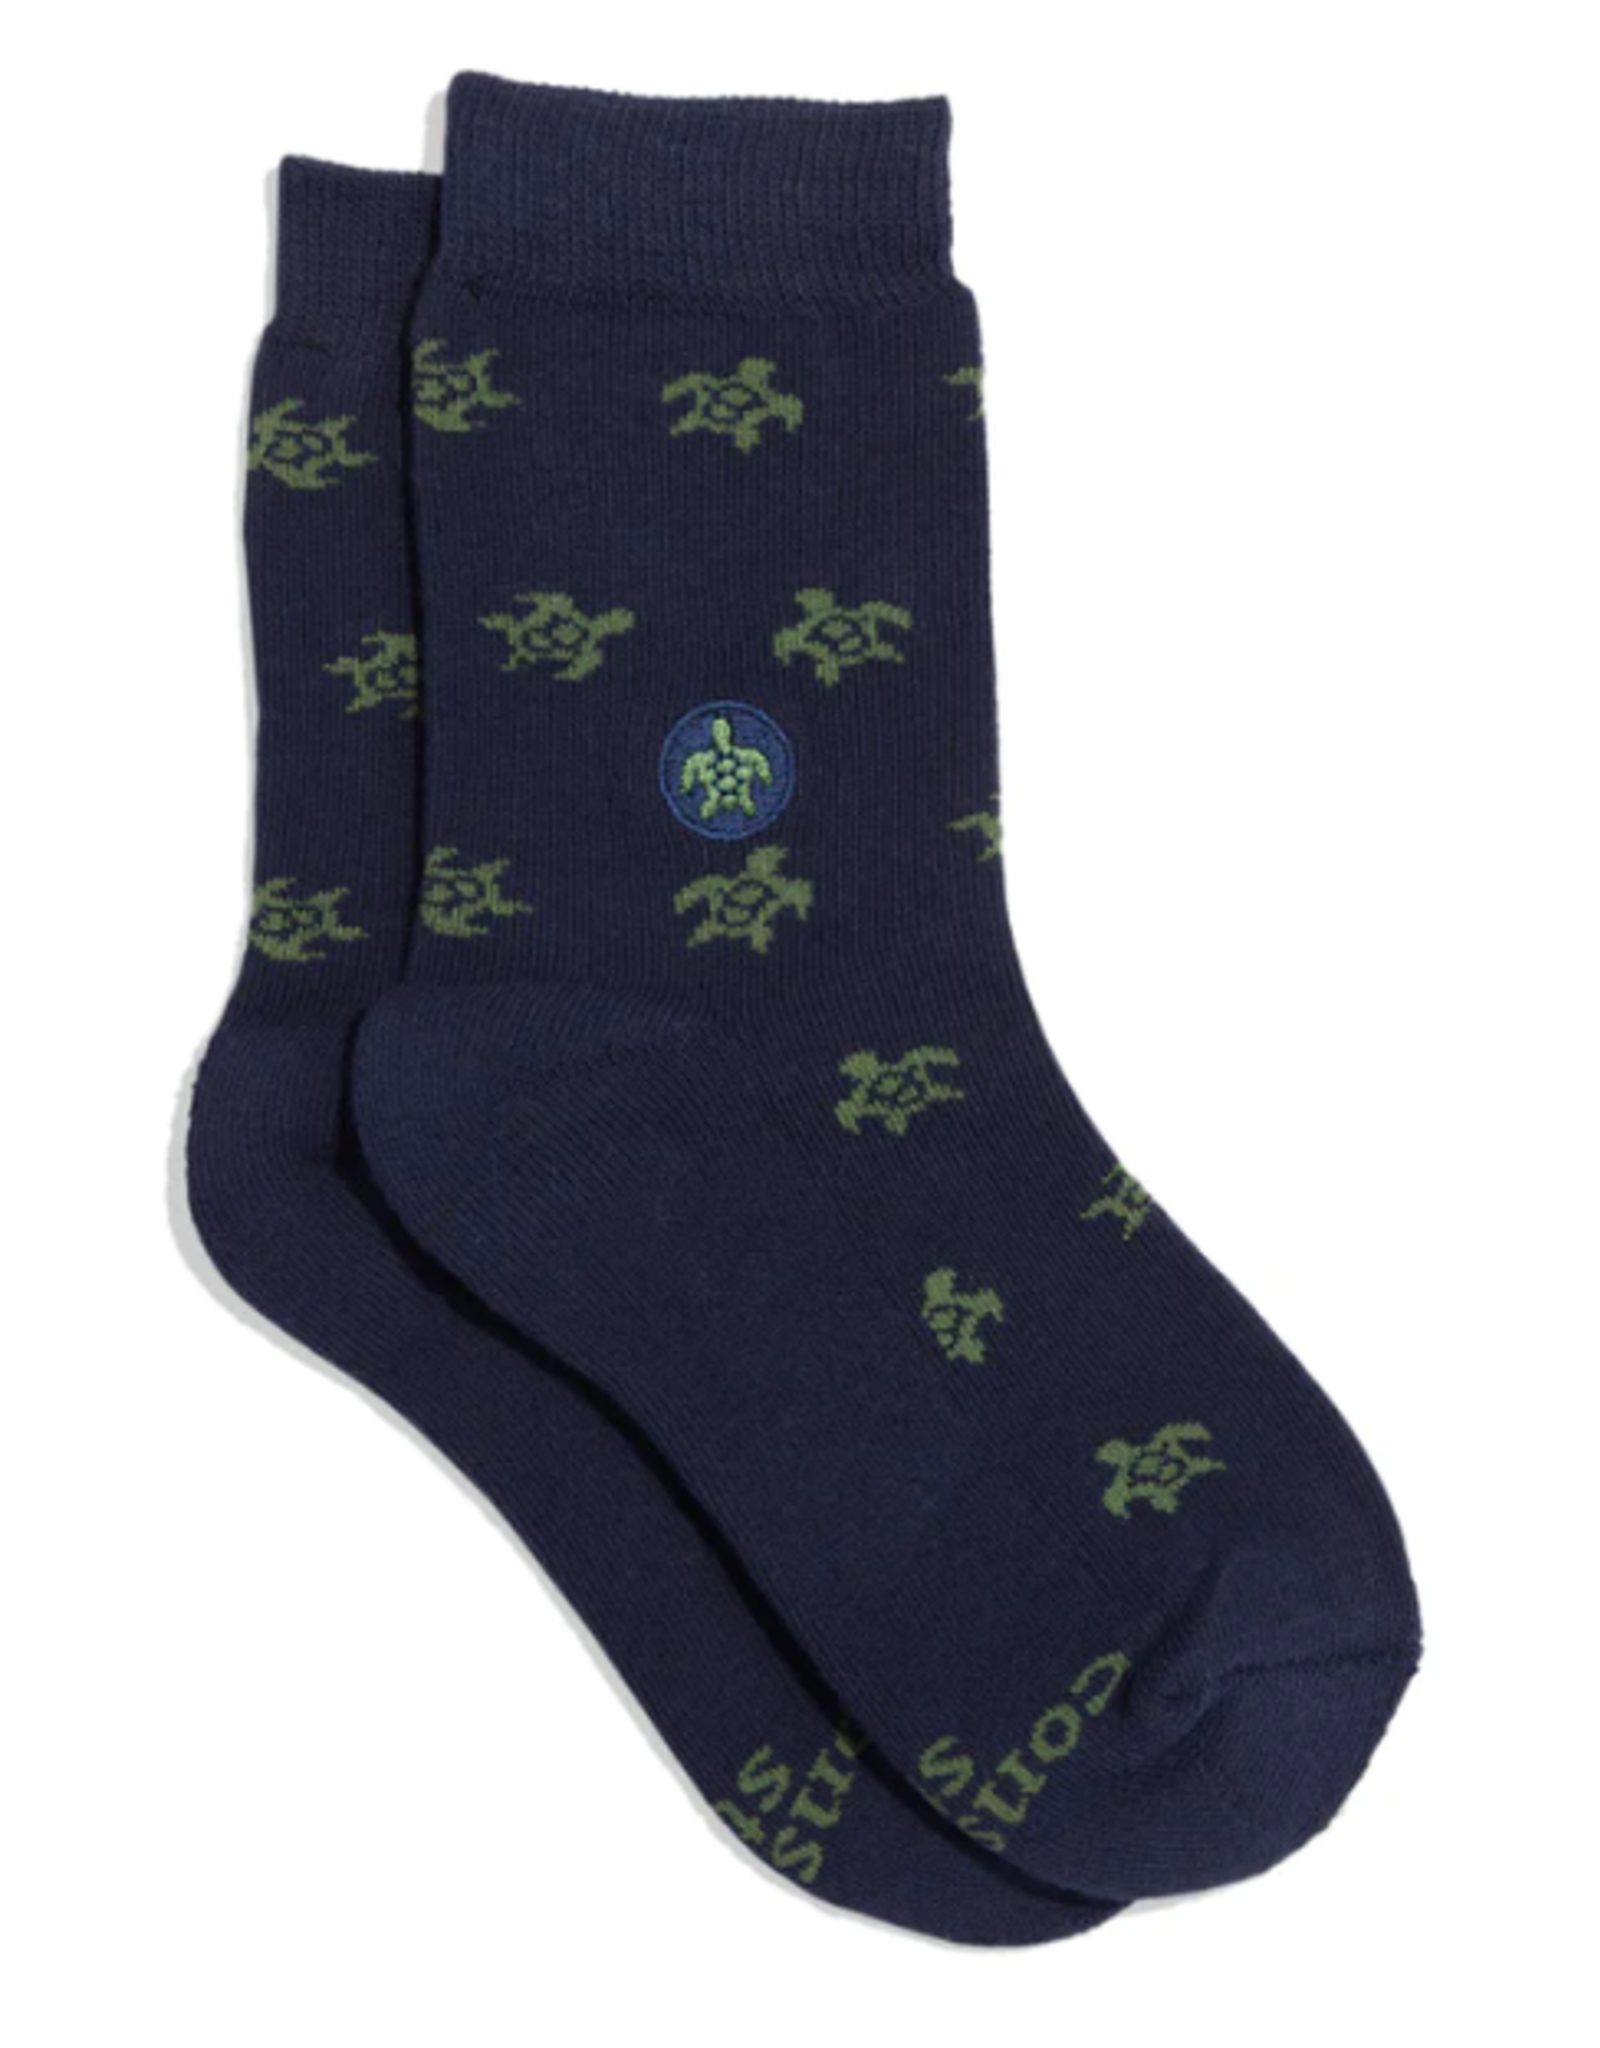 Conscious Step Kids Socks that Protect Turtles